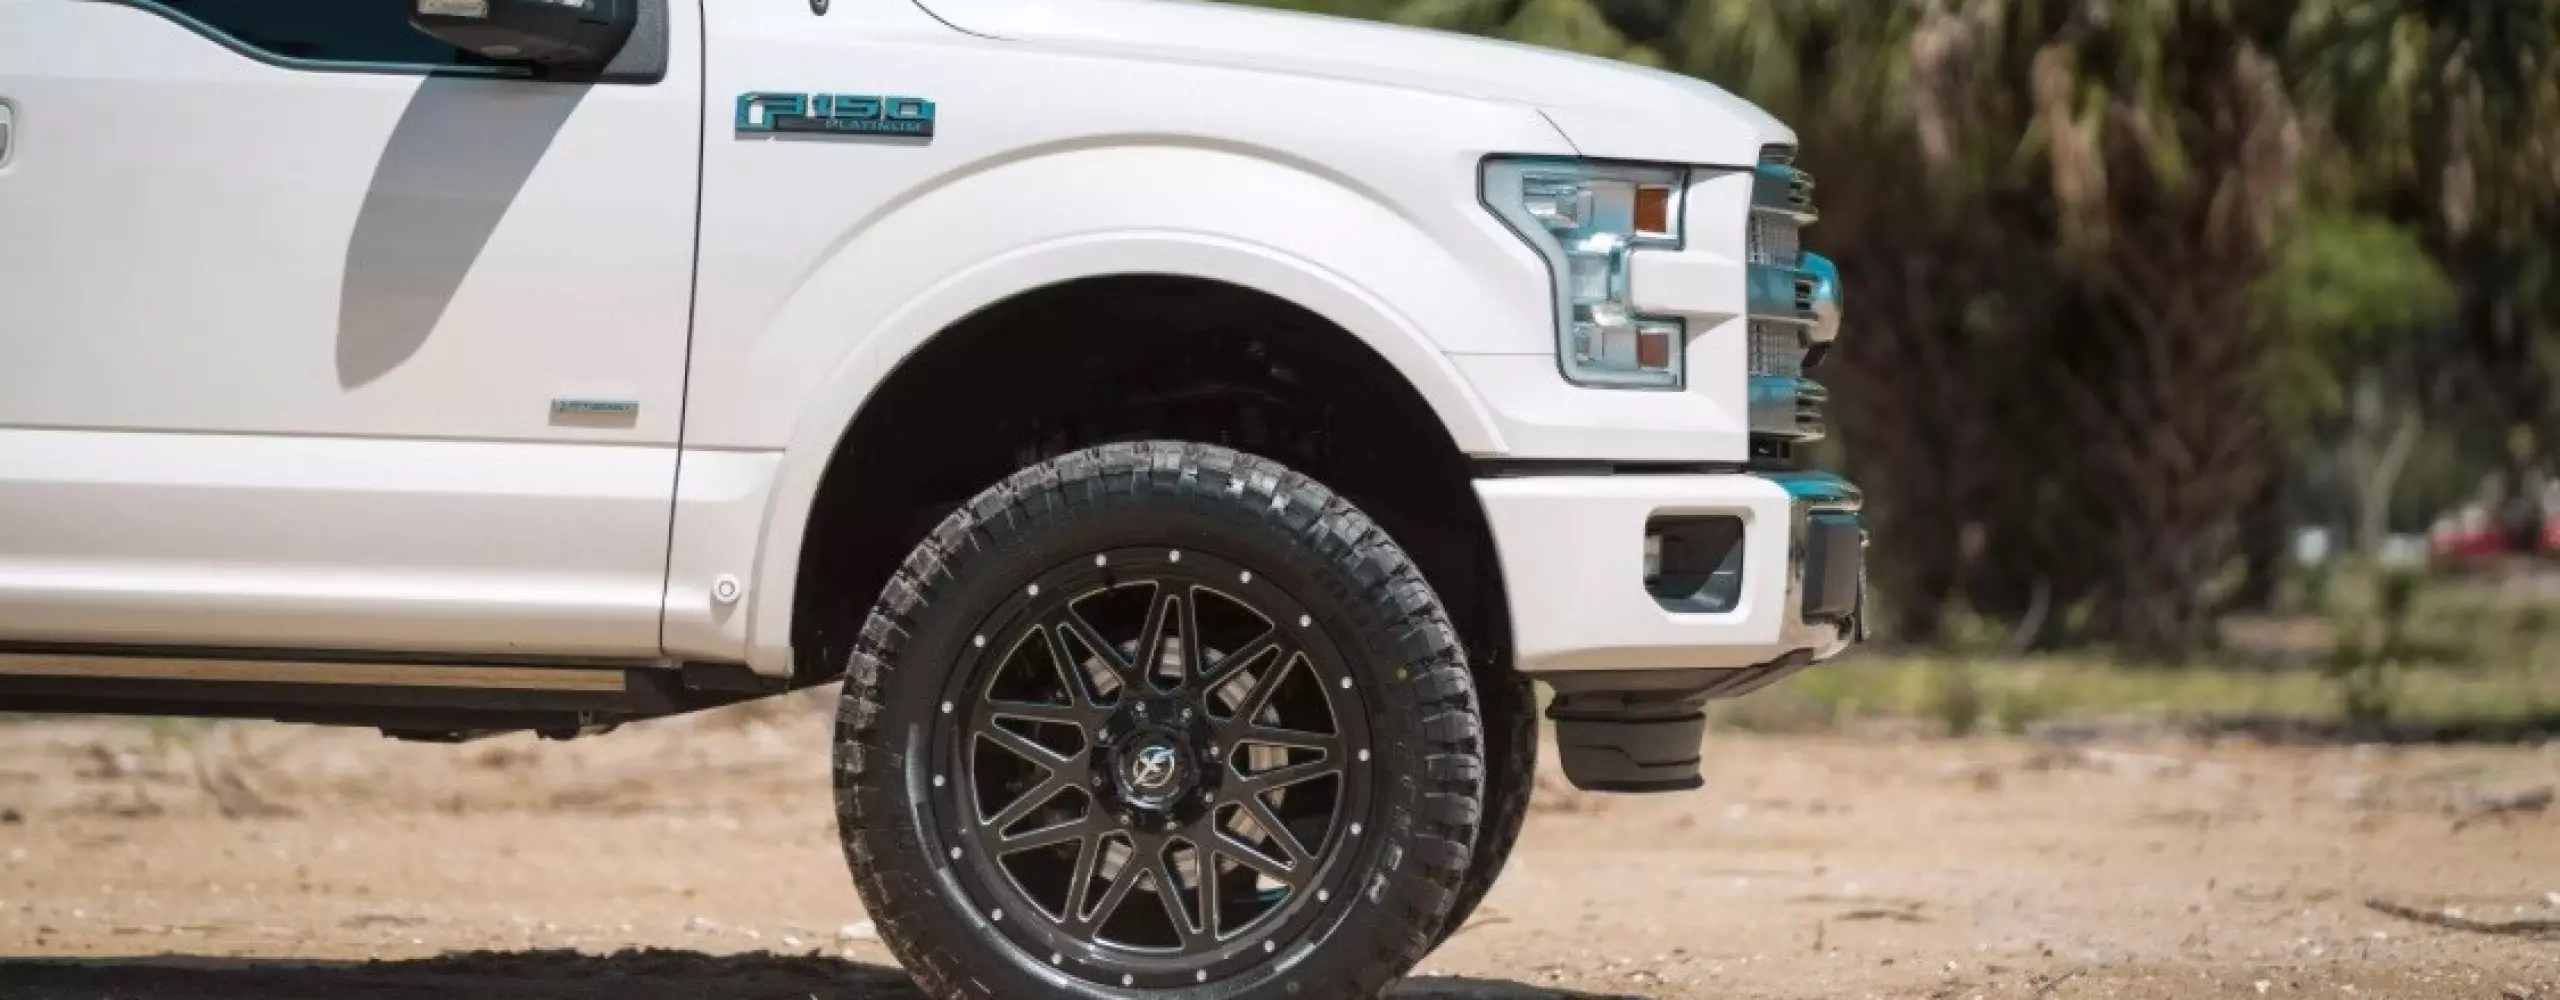 image of truck on dirt road with new wheels and rims on the rotating banner on the home page